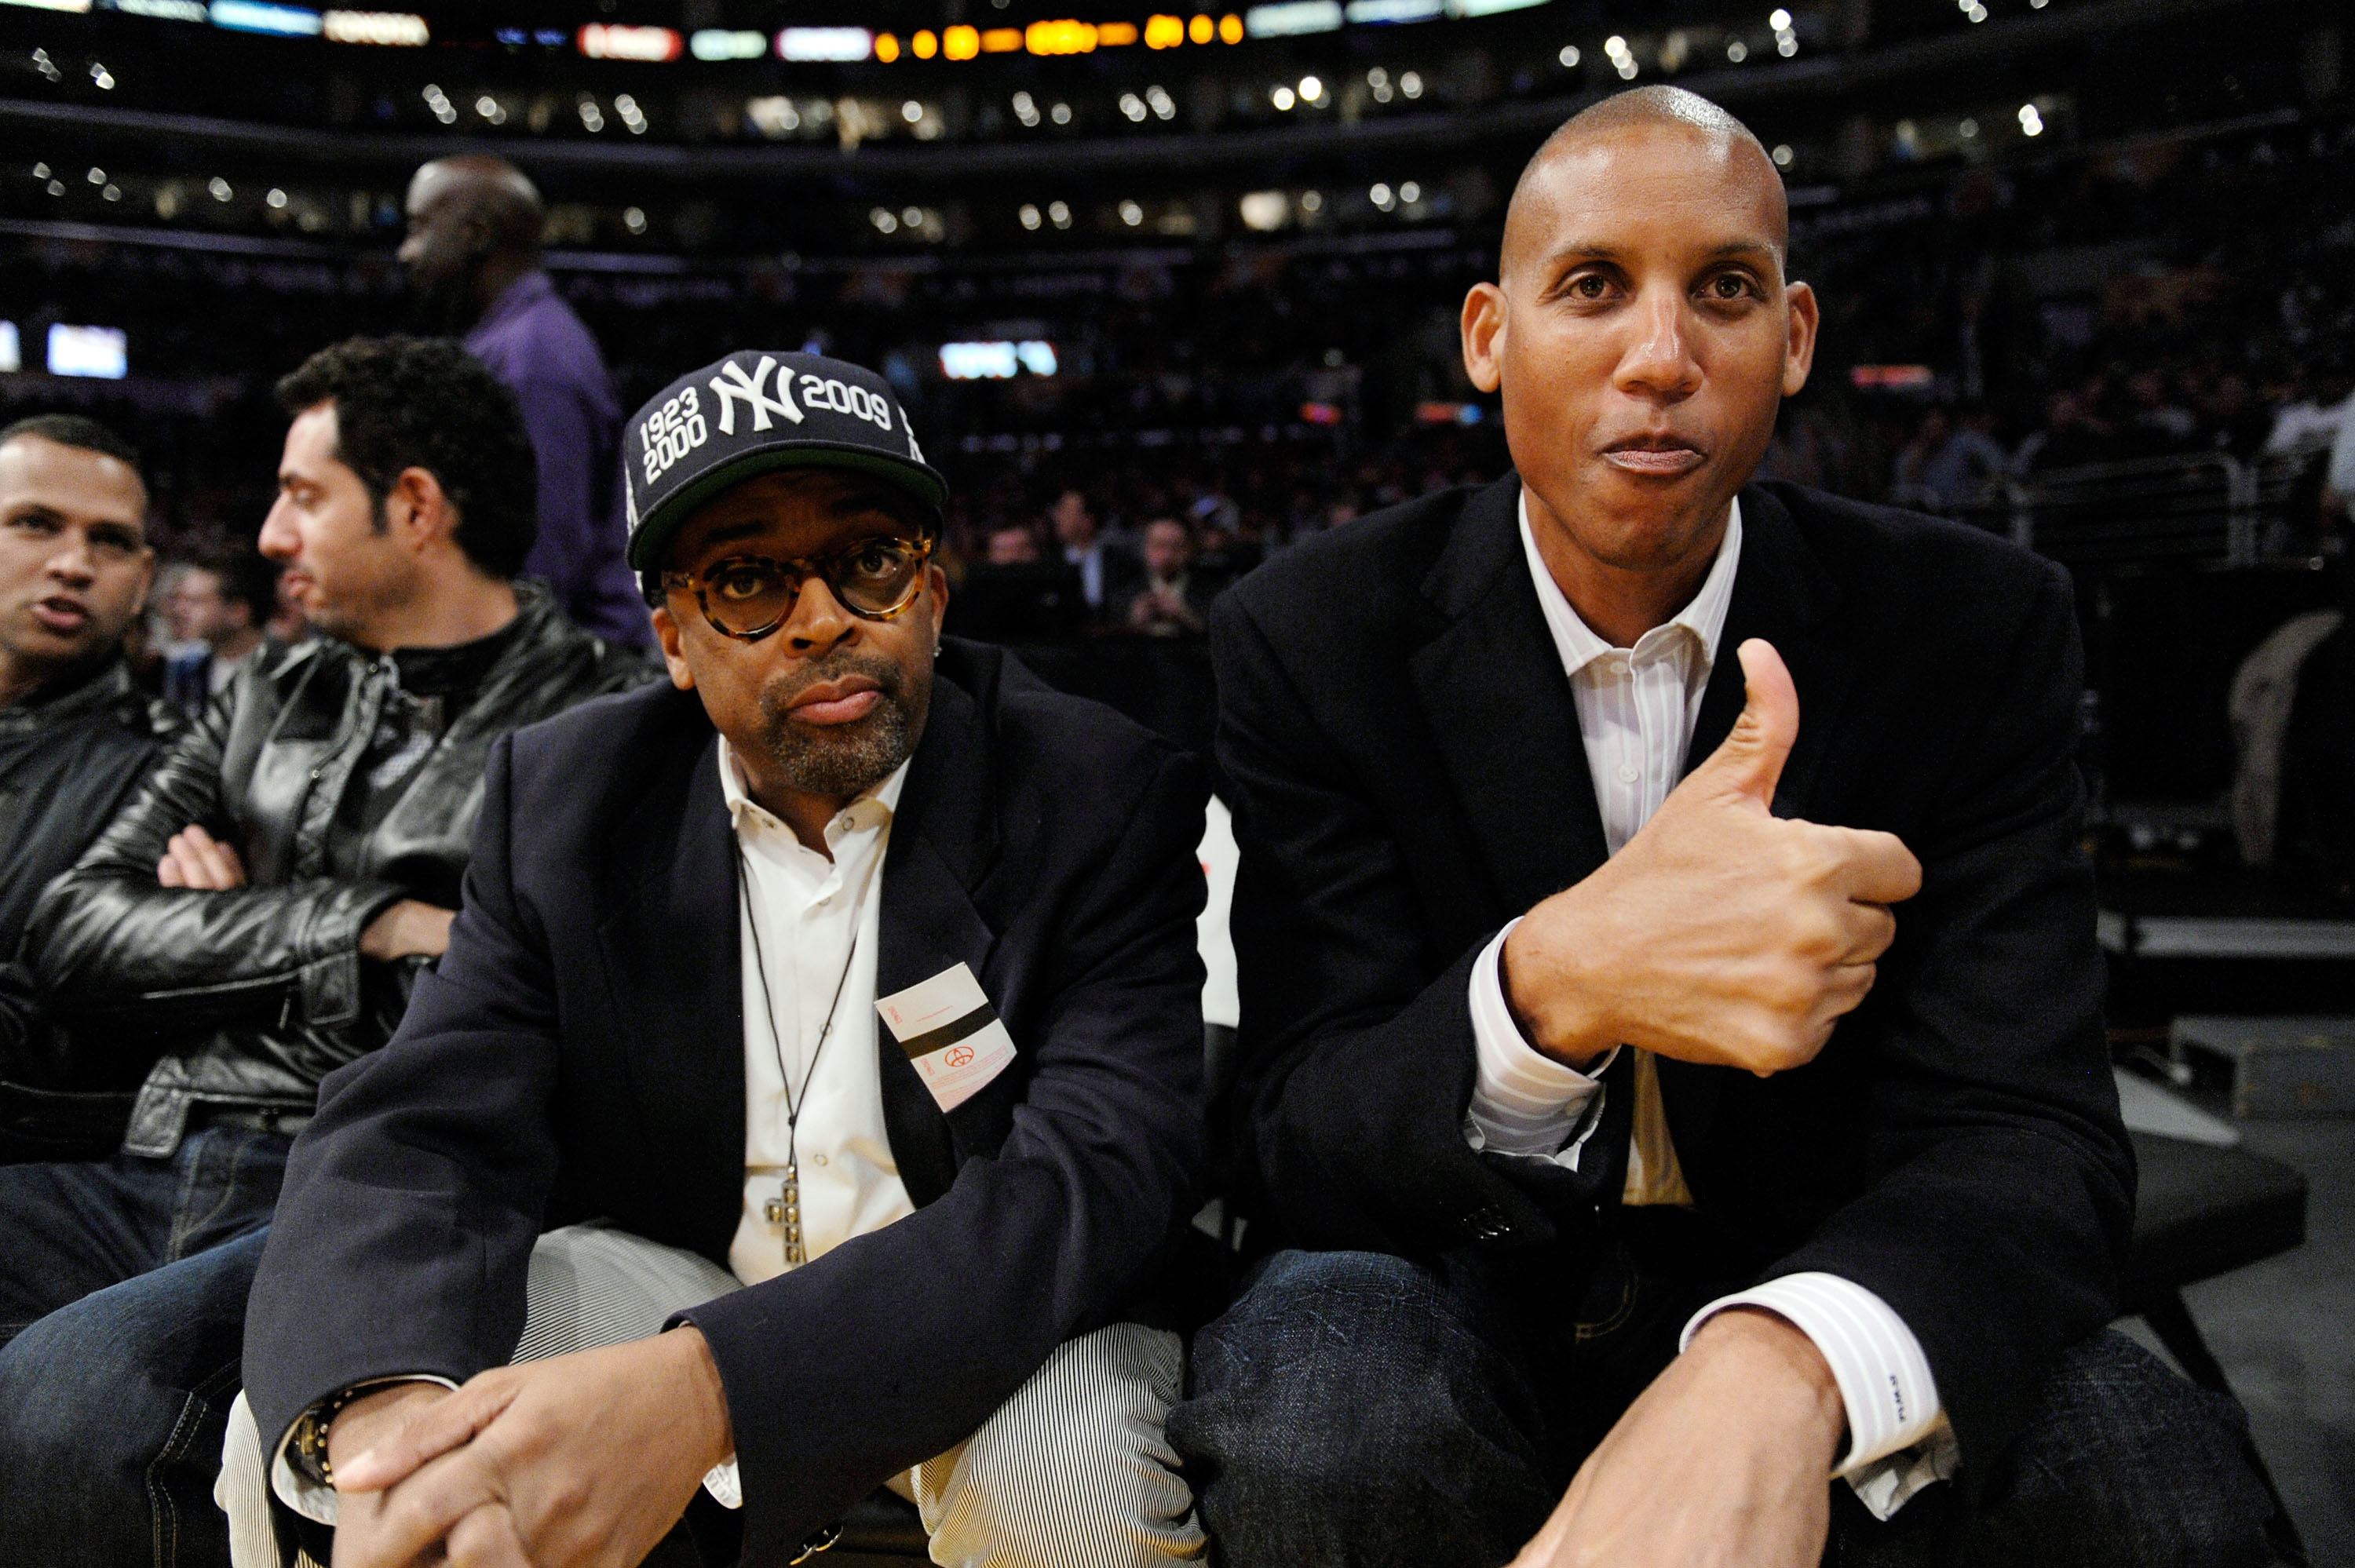 LOS ANGELES, CA - NOVEMBER 24: Former NBA star Reggie Miller of the Indiana Pacers and film maker Spike Lee look on during the NBA game between the New York Knicks and Los Angeles Lakers Staples Center on November 24, 2009 in Los Angeles, California.  NOT